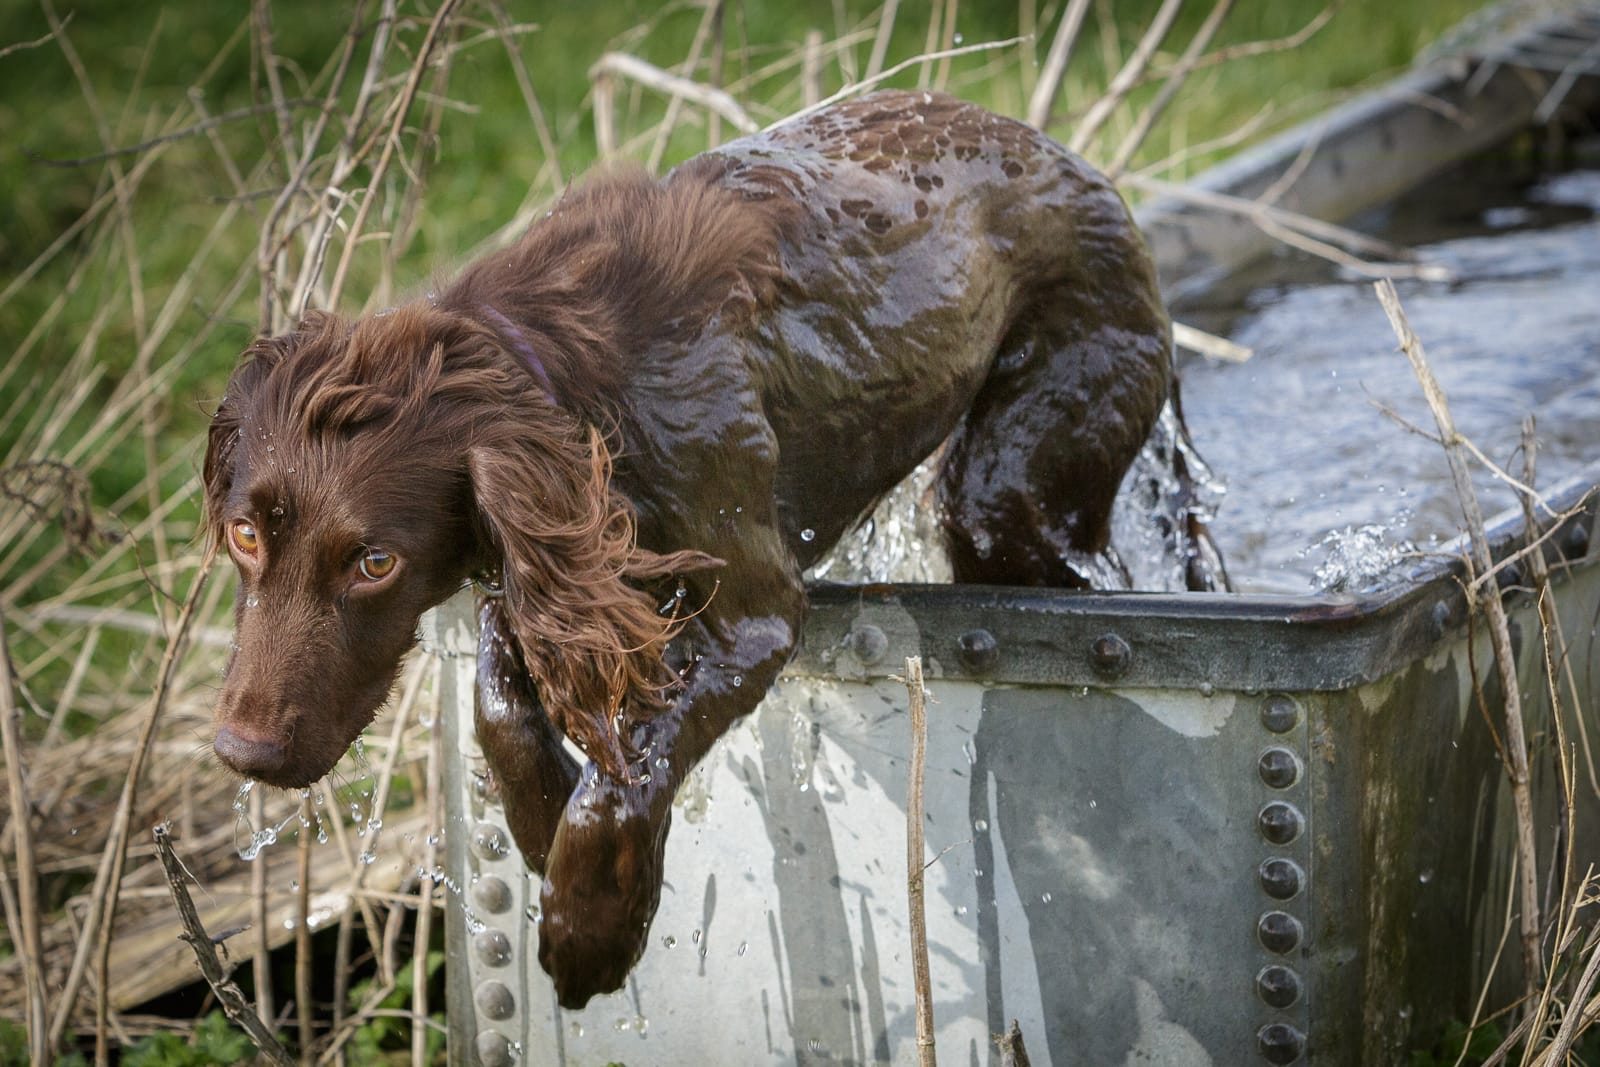 brown cocker spaniel jumping out of water trough